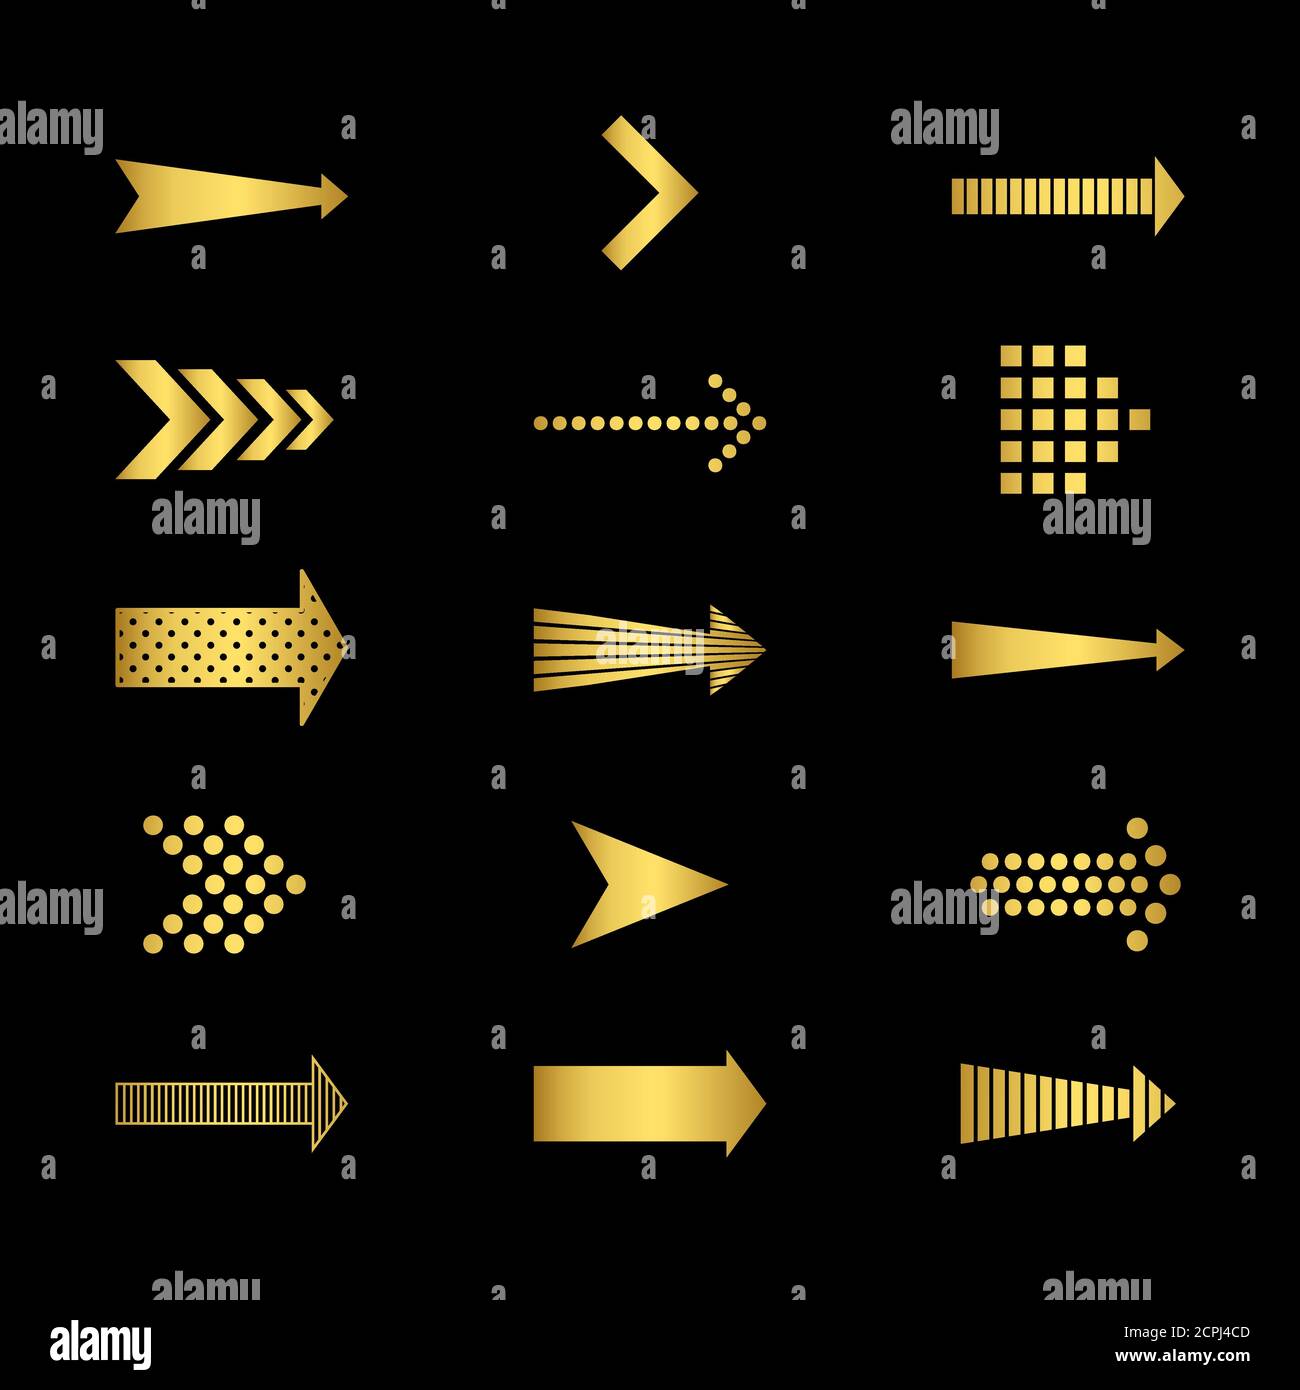 Golden arrows icons on black background vector set. Illustration of arrow symbol gold colored Stock Vector